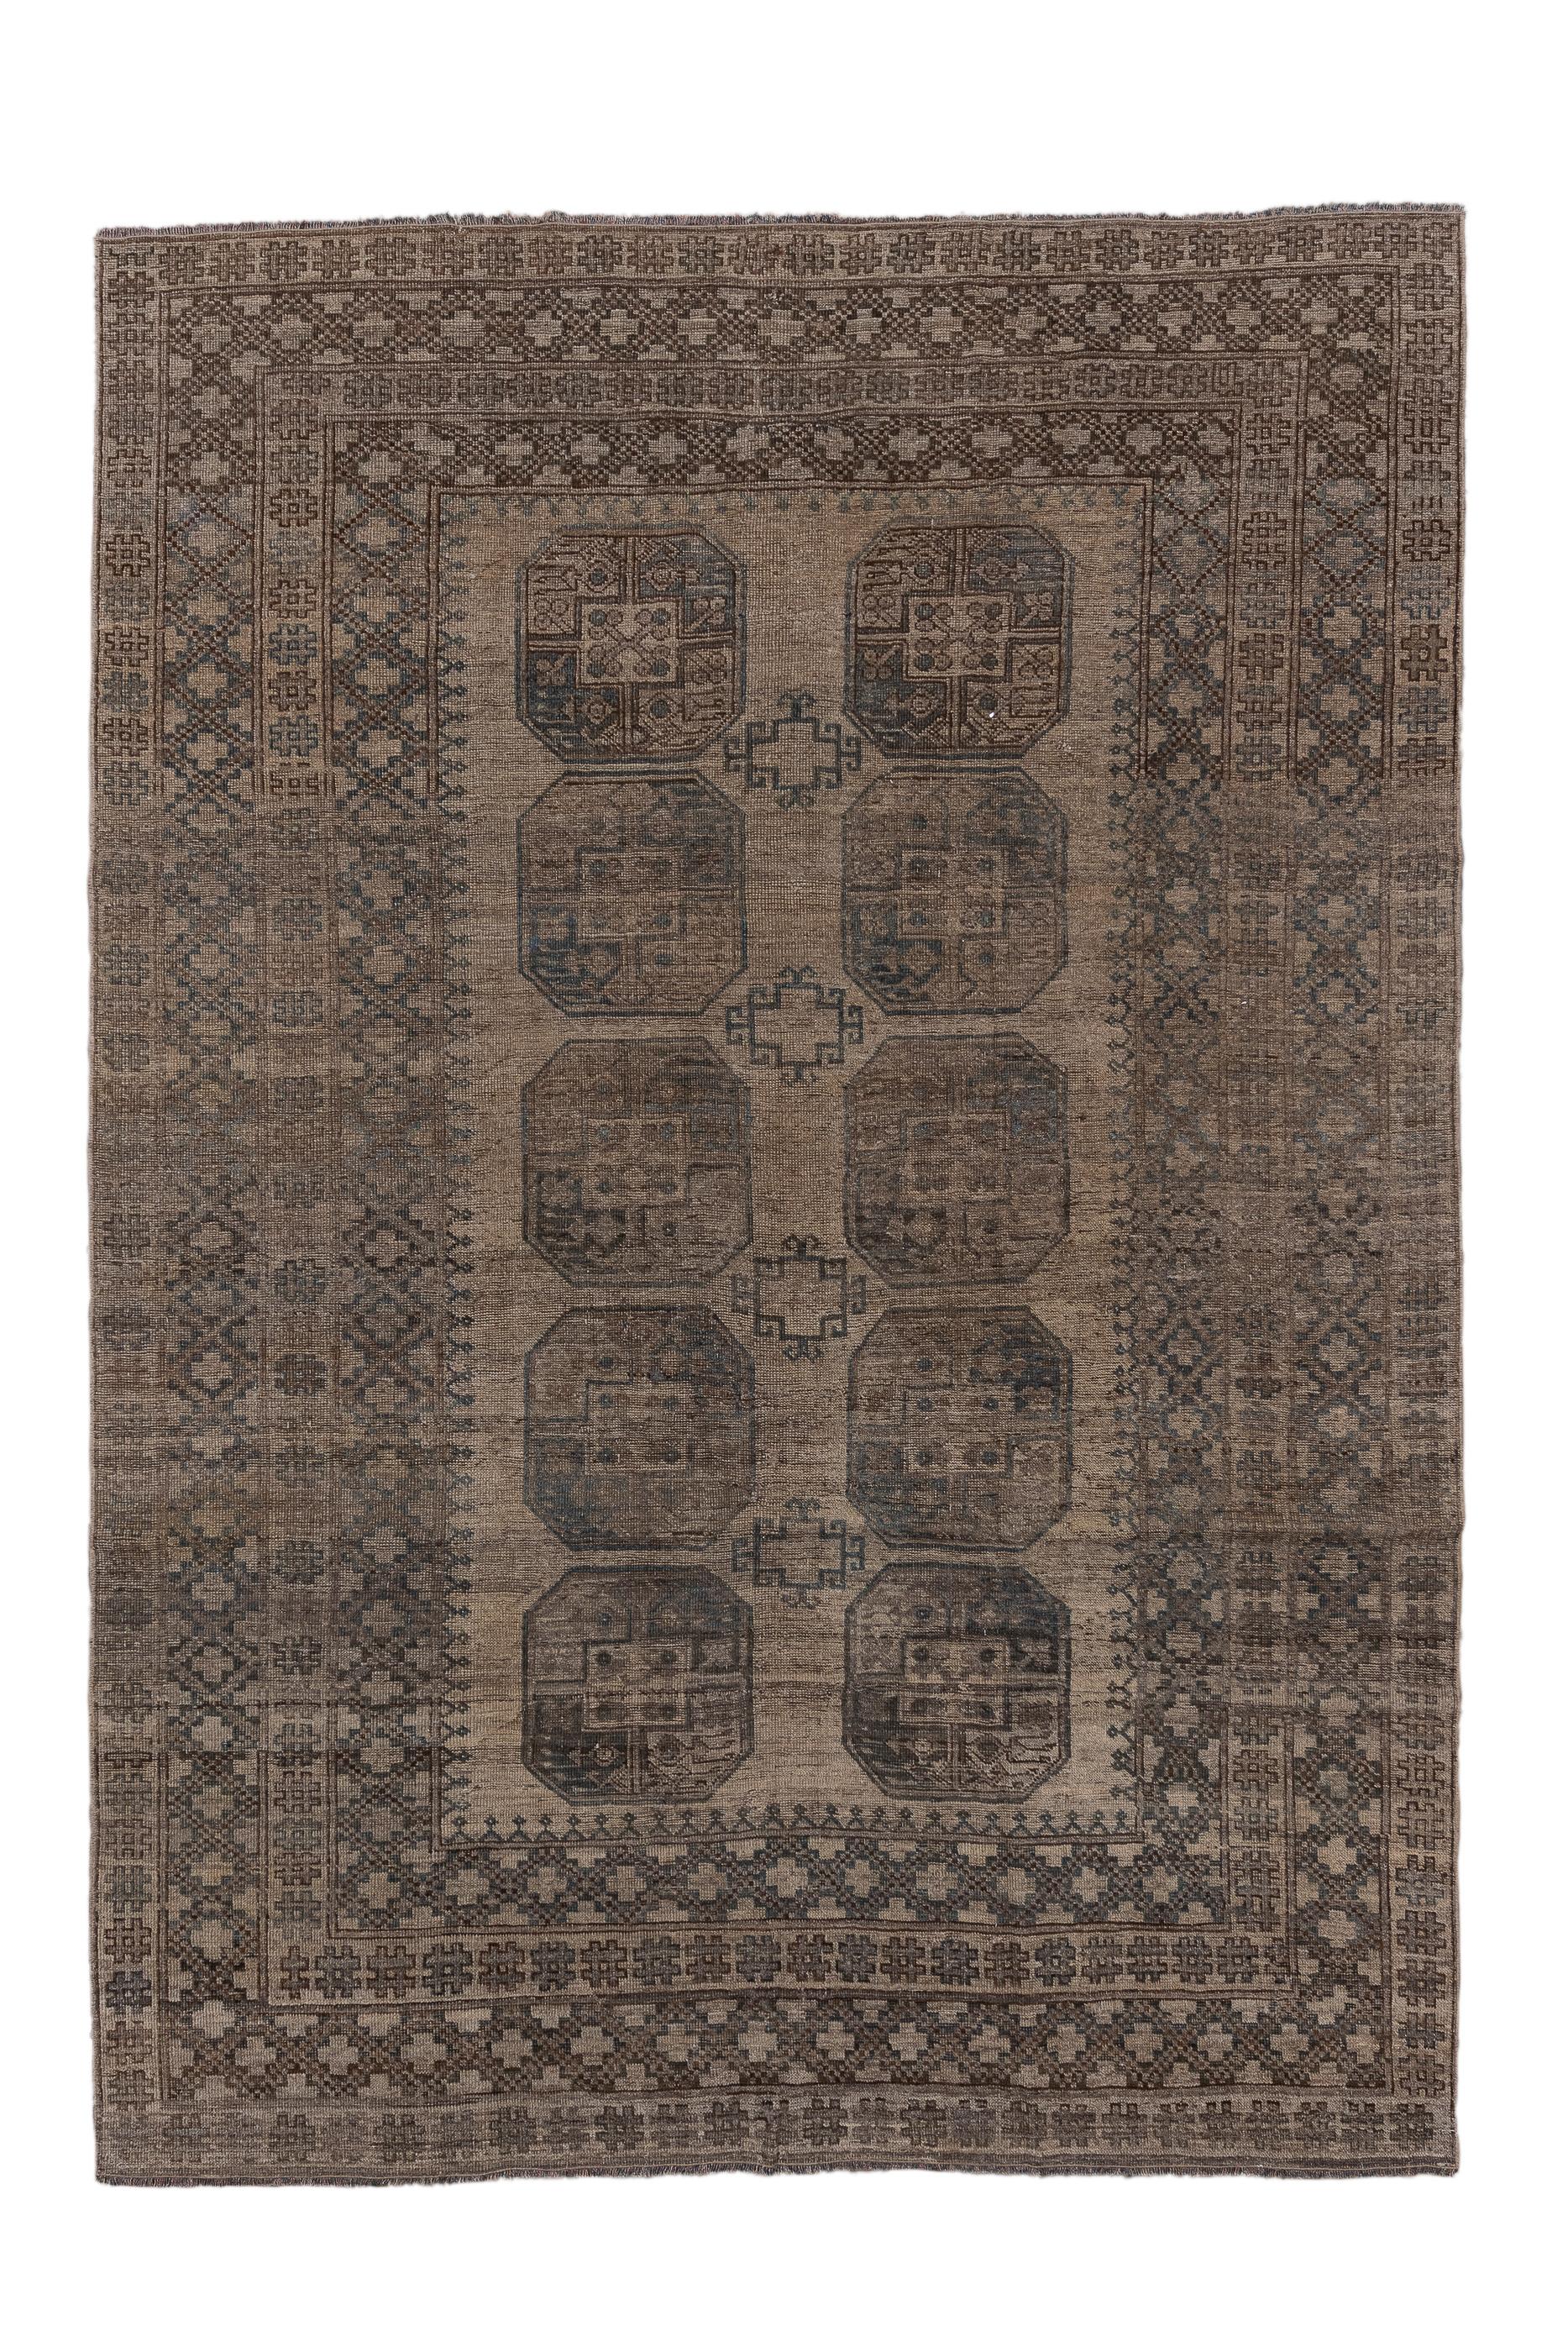 This all wool tribal piece shows a tan field with two columns each of five characteristic emblematic octagonal Gulli guls with small stepped cruciform minors between.  The very wide and  multifarious border system show two bands of connected